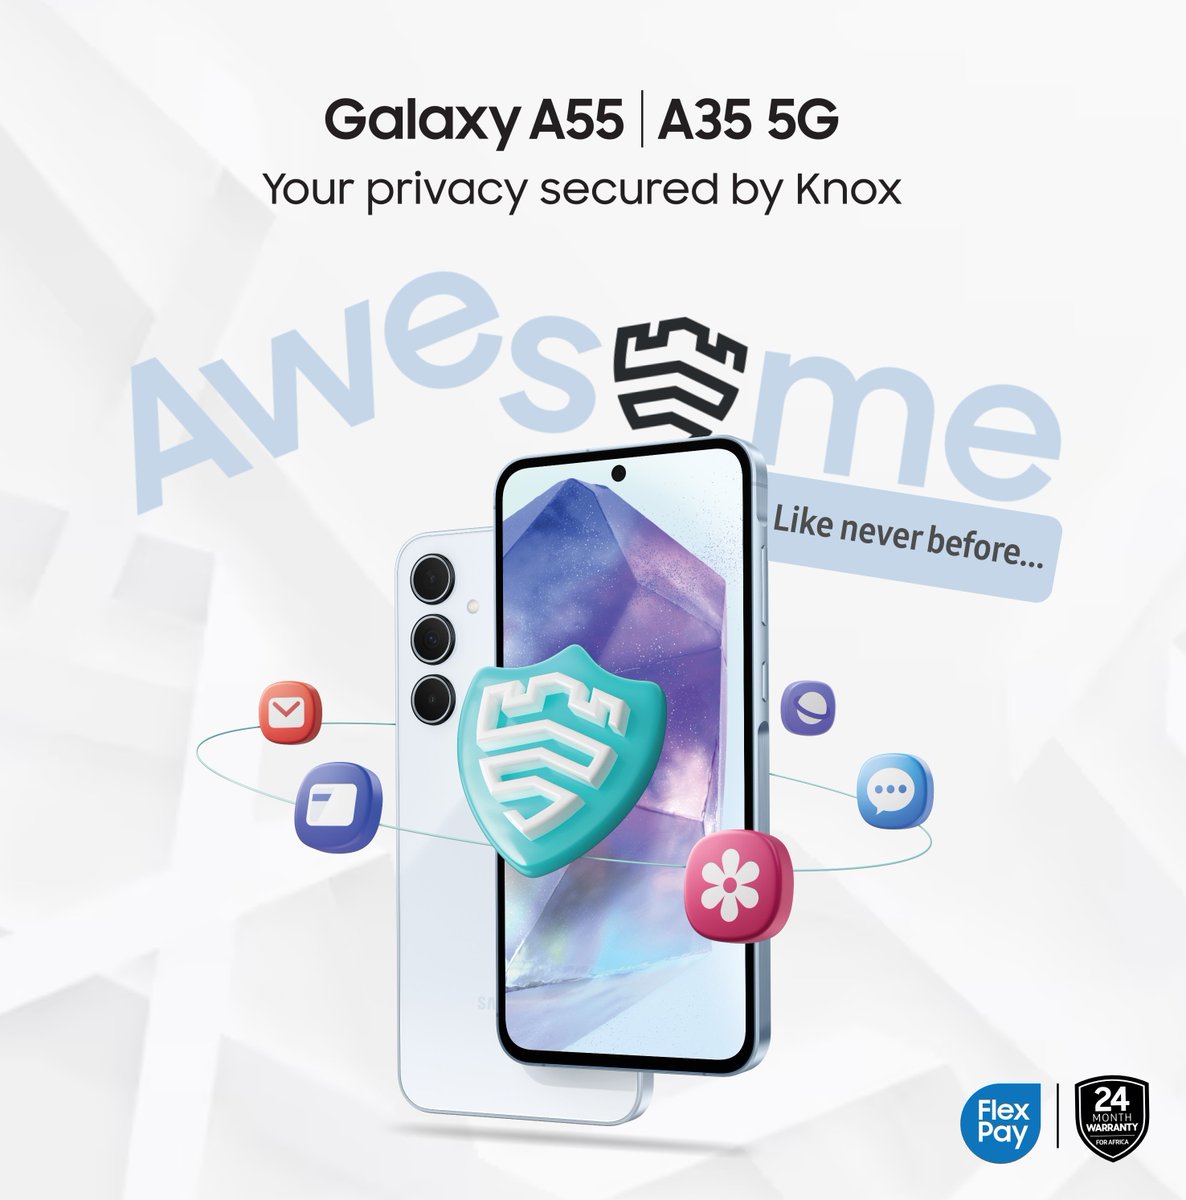 Get the new #GalaxyA3 #GalaxyA55 5G and get the protection of the Samsung Knox Vault.

Knox Vault is an EAL5+ certified, tamper-resistant environment that holds the data that matters most to you.

What else do you know about Knox Vault?

#AwesomeLikeNeverBefore
#SamsungNigeria